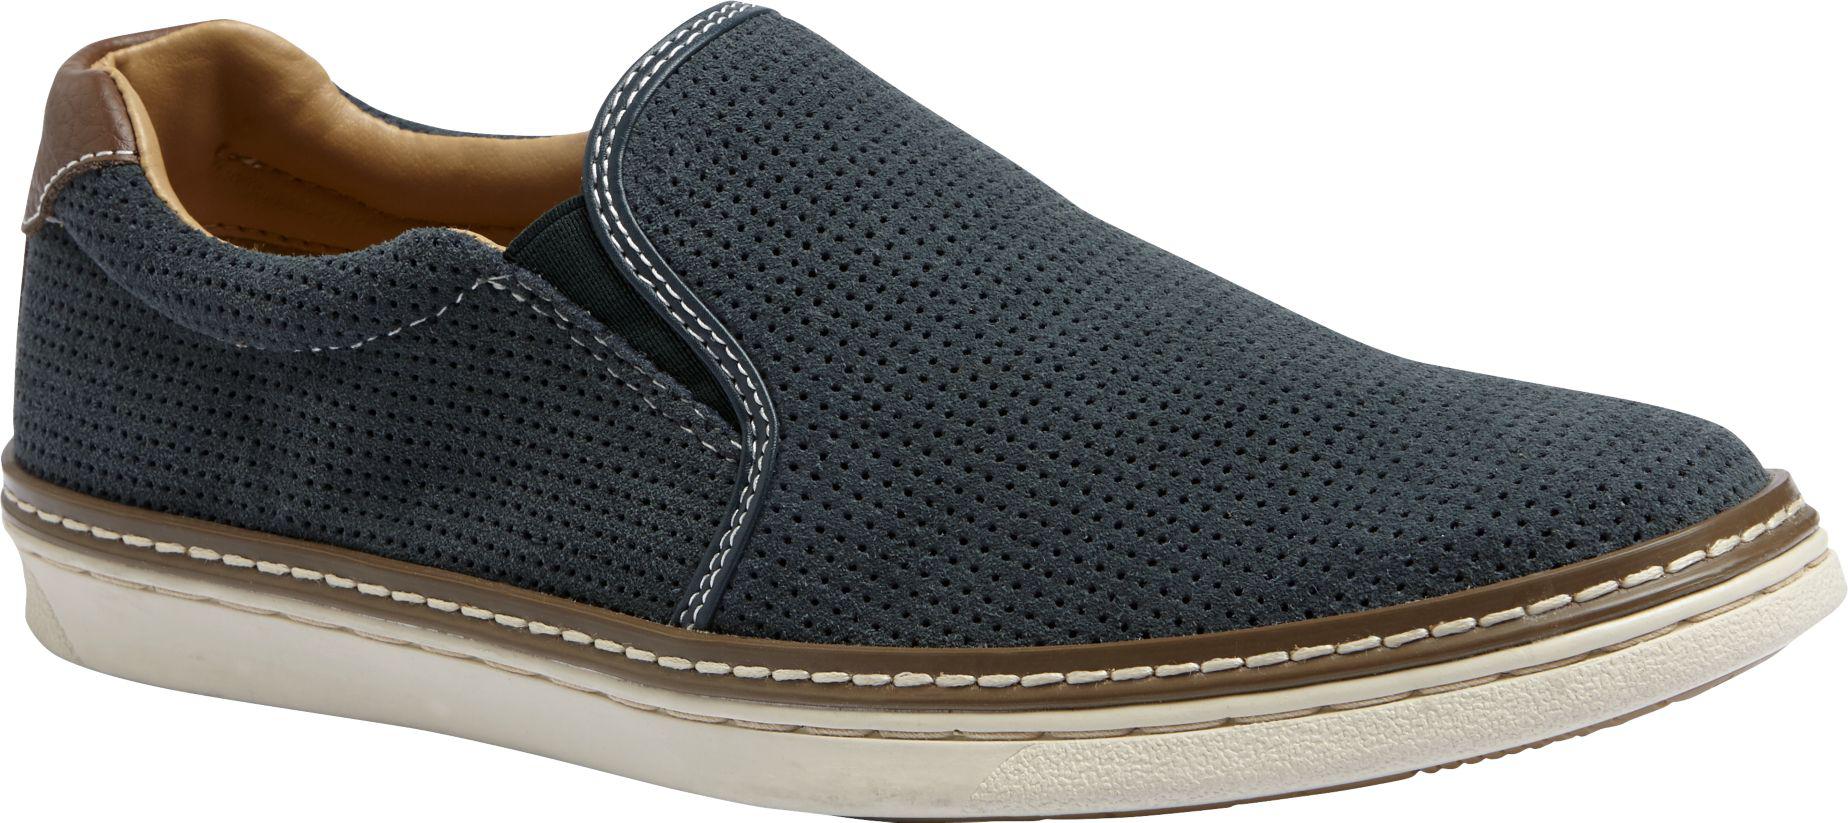 Lyst - Jos. a. bank Joseph Abboud Casual Slip-on Loafers in Blue for Men